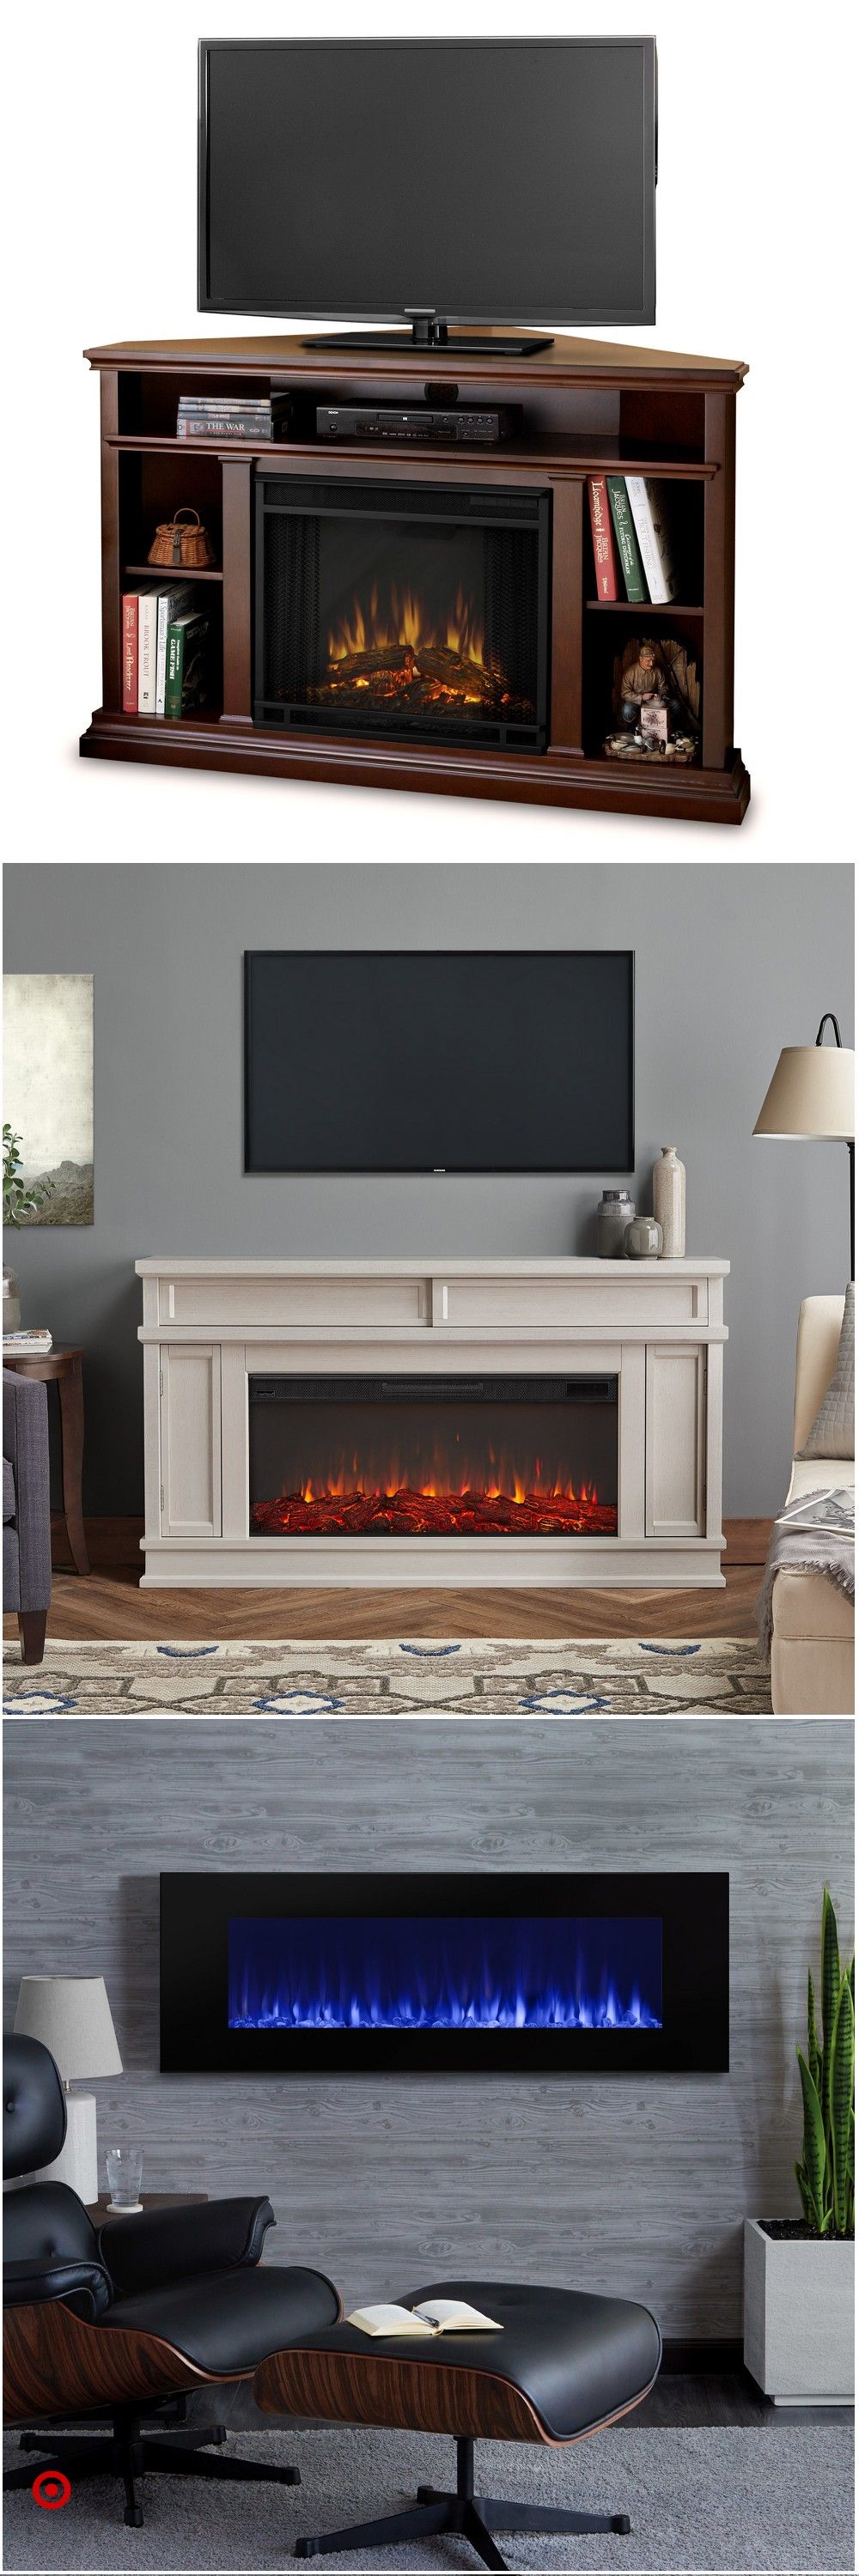 Fireplace Simulator Best Of Haranchal Bains Haranchal09 On Pinterest